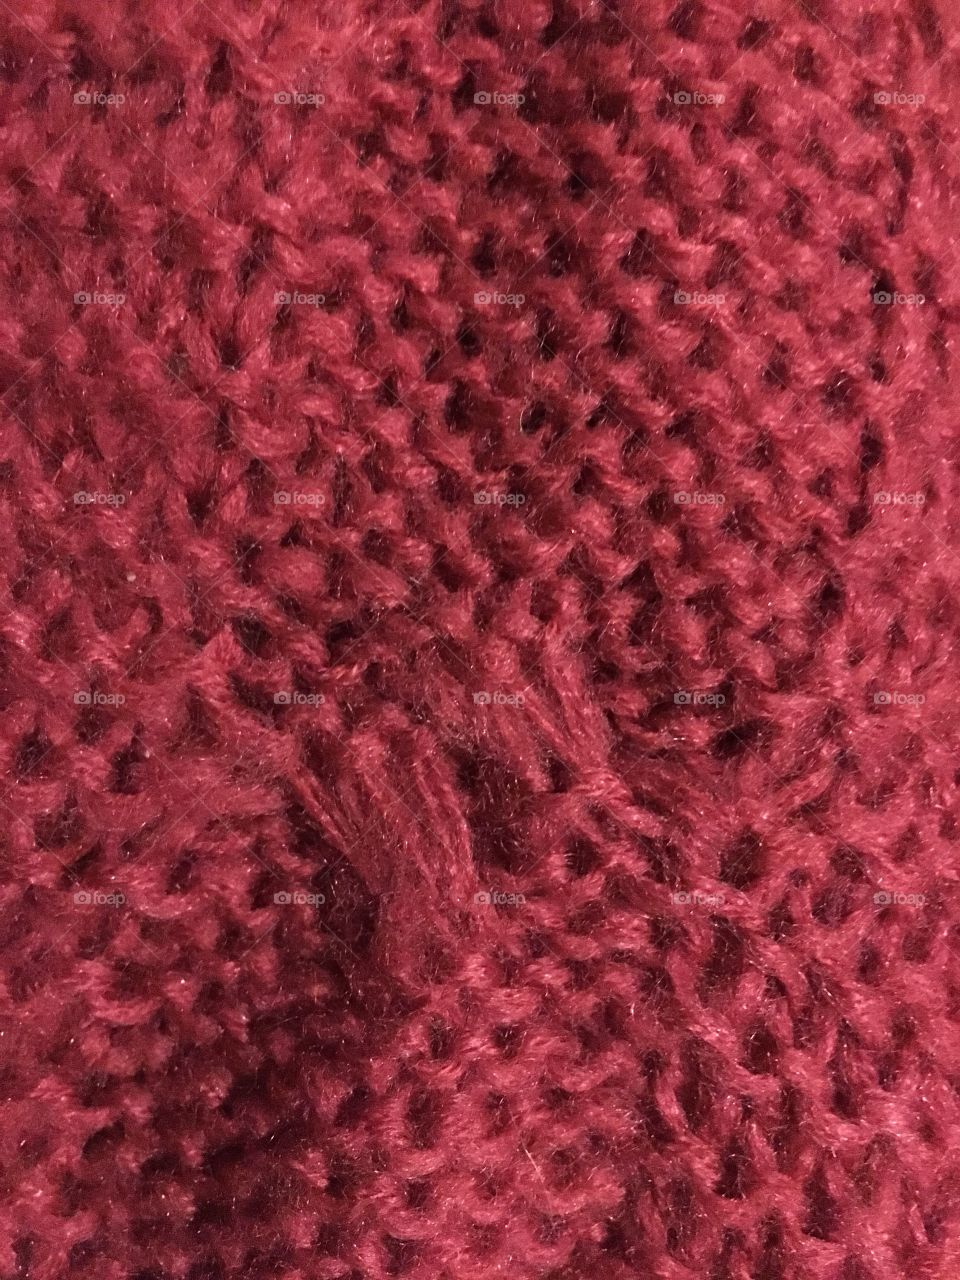 Scarf Texture